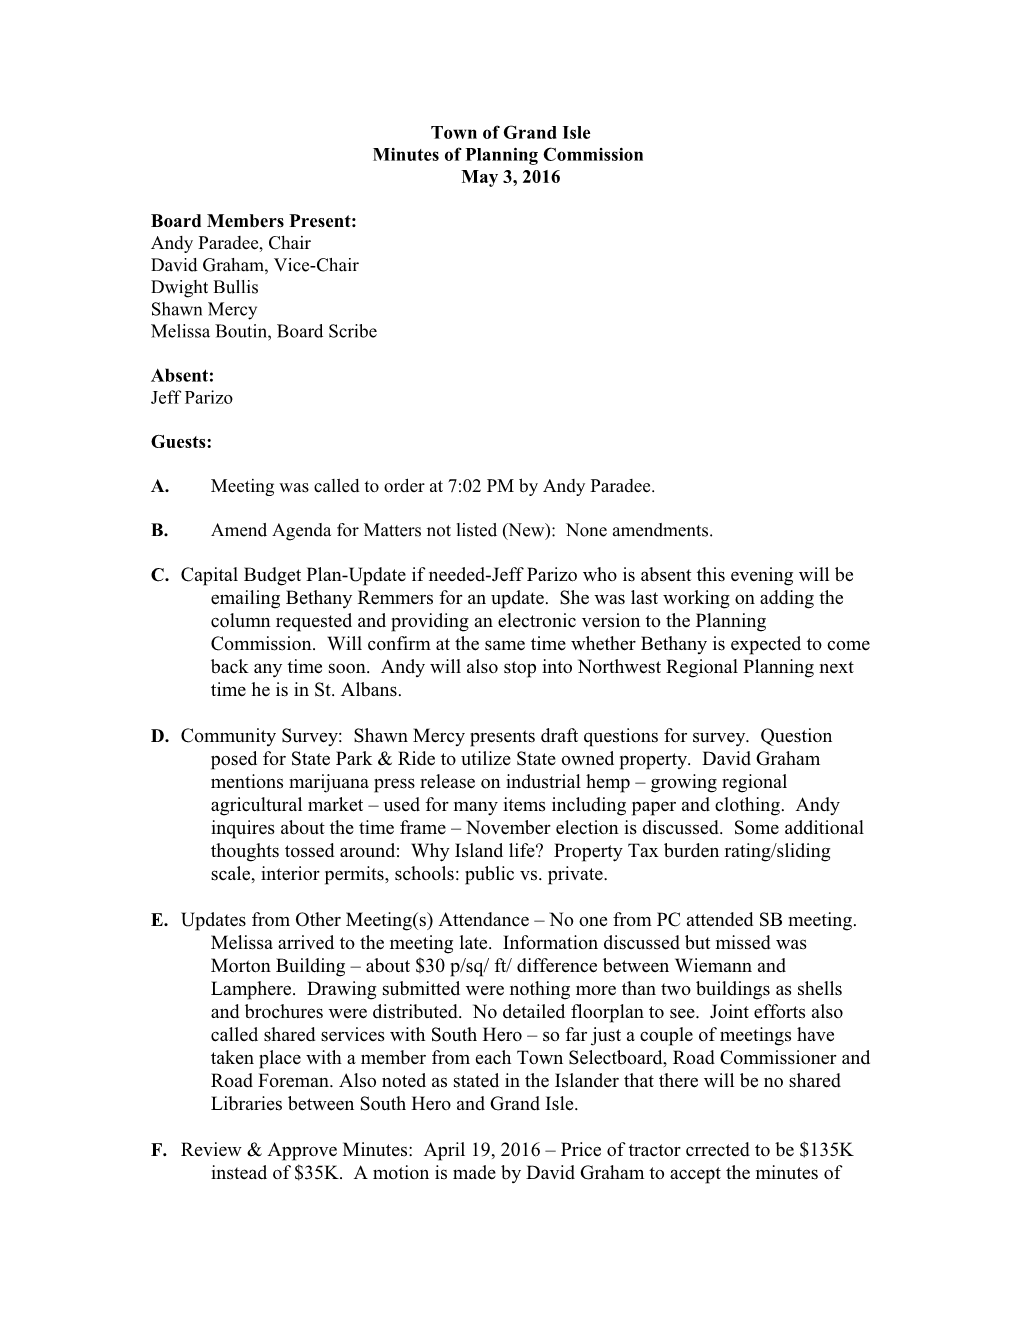 Minutes of Grand Isle Planning Commission November 18, 2014